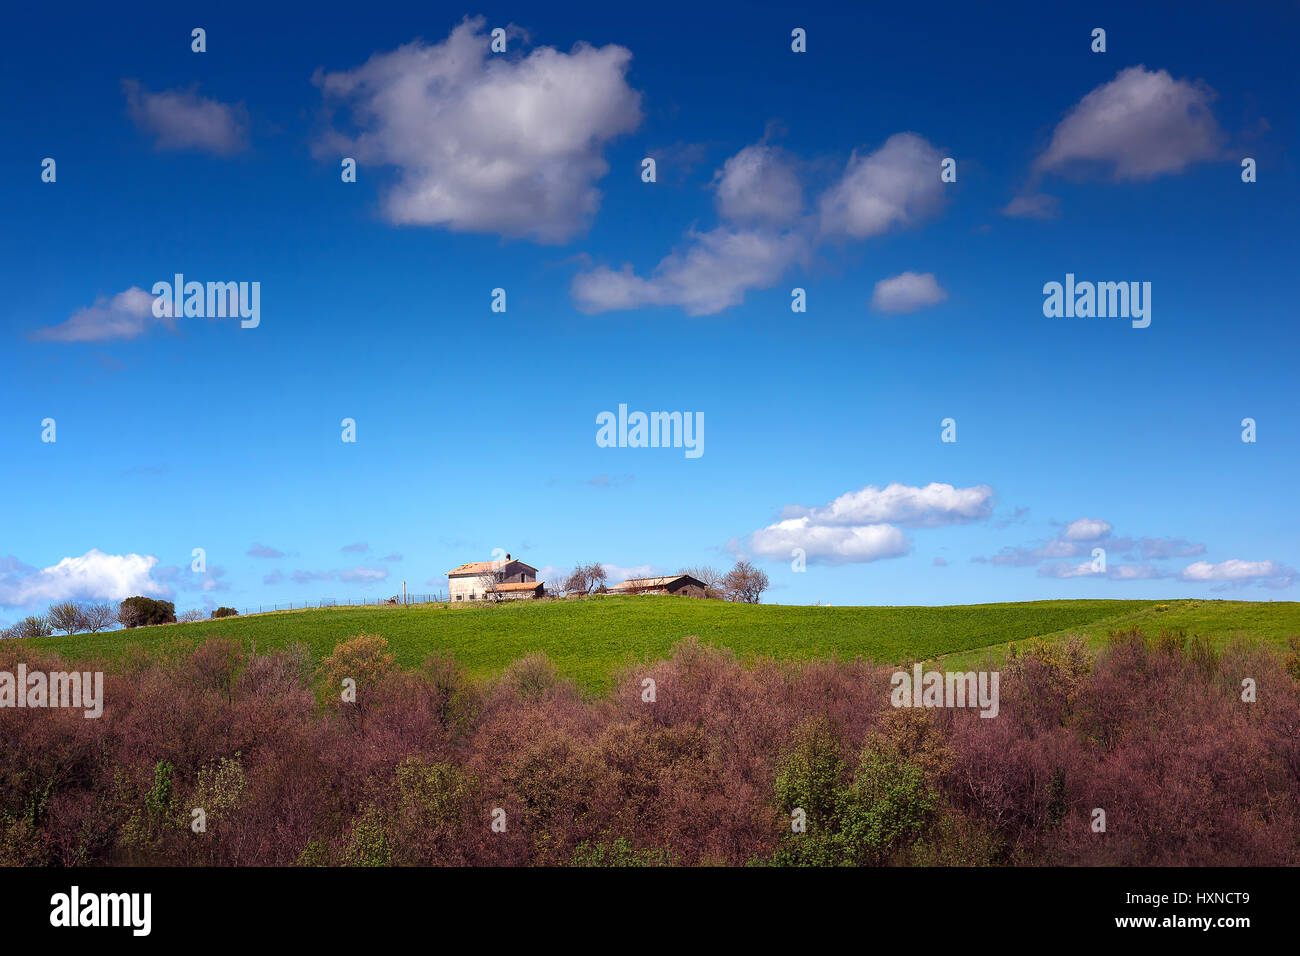 Farm House On The Prairie Country House On The Hill And Background Of Blue Sky And Clouds Stock Photo Alamy